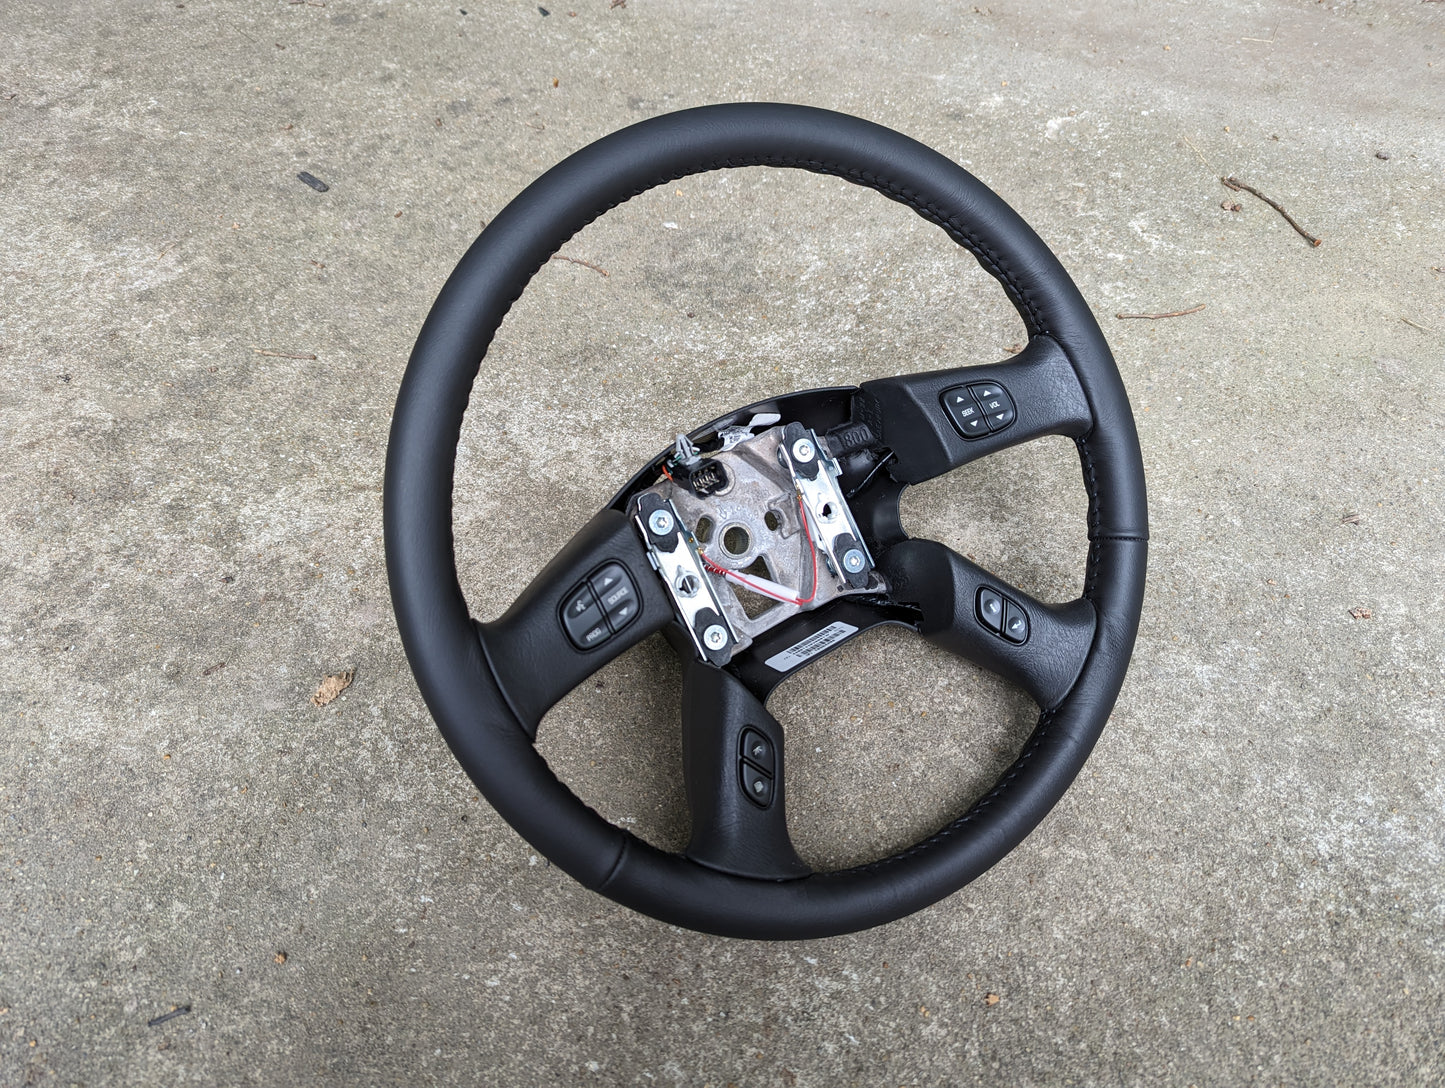 NEW Leather OEM Steering Wheel for 2002-2009 GM Chevy Silverado Trailblazer and more